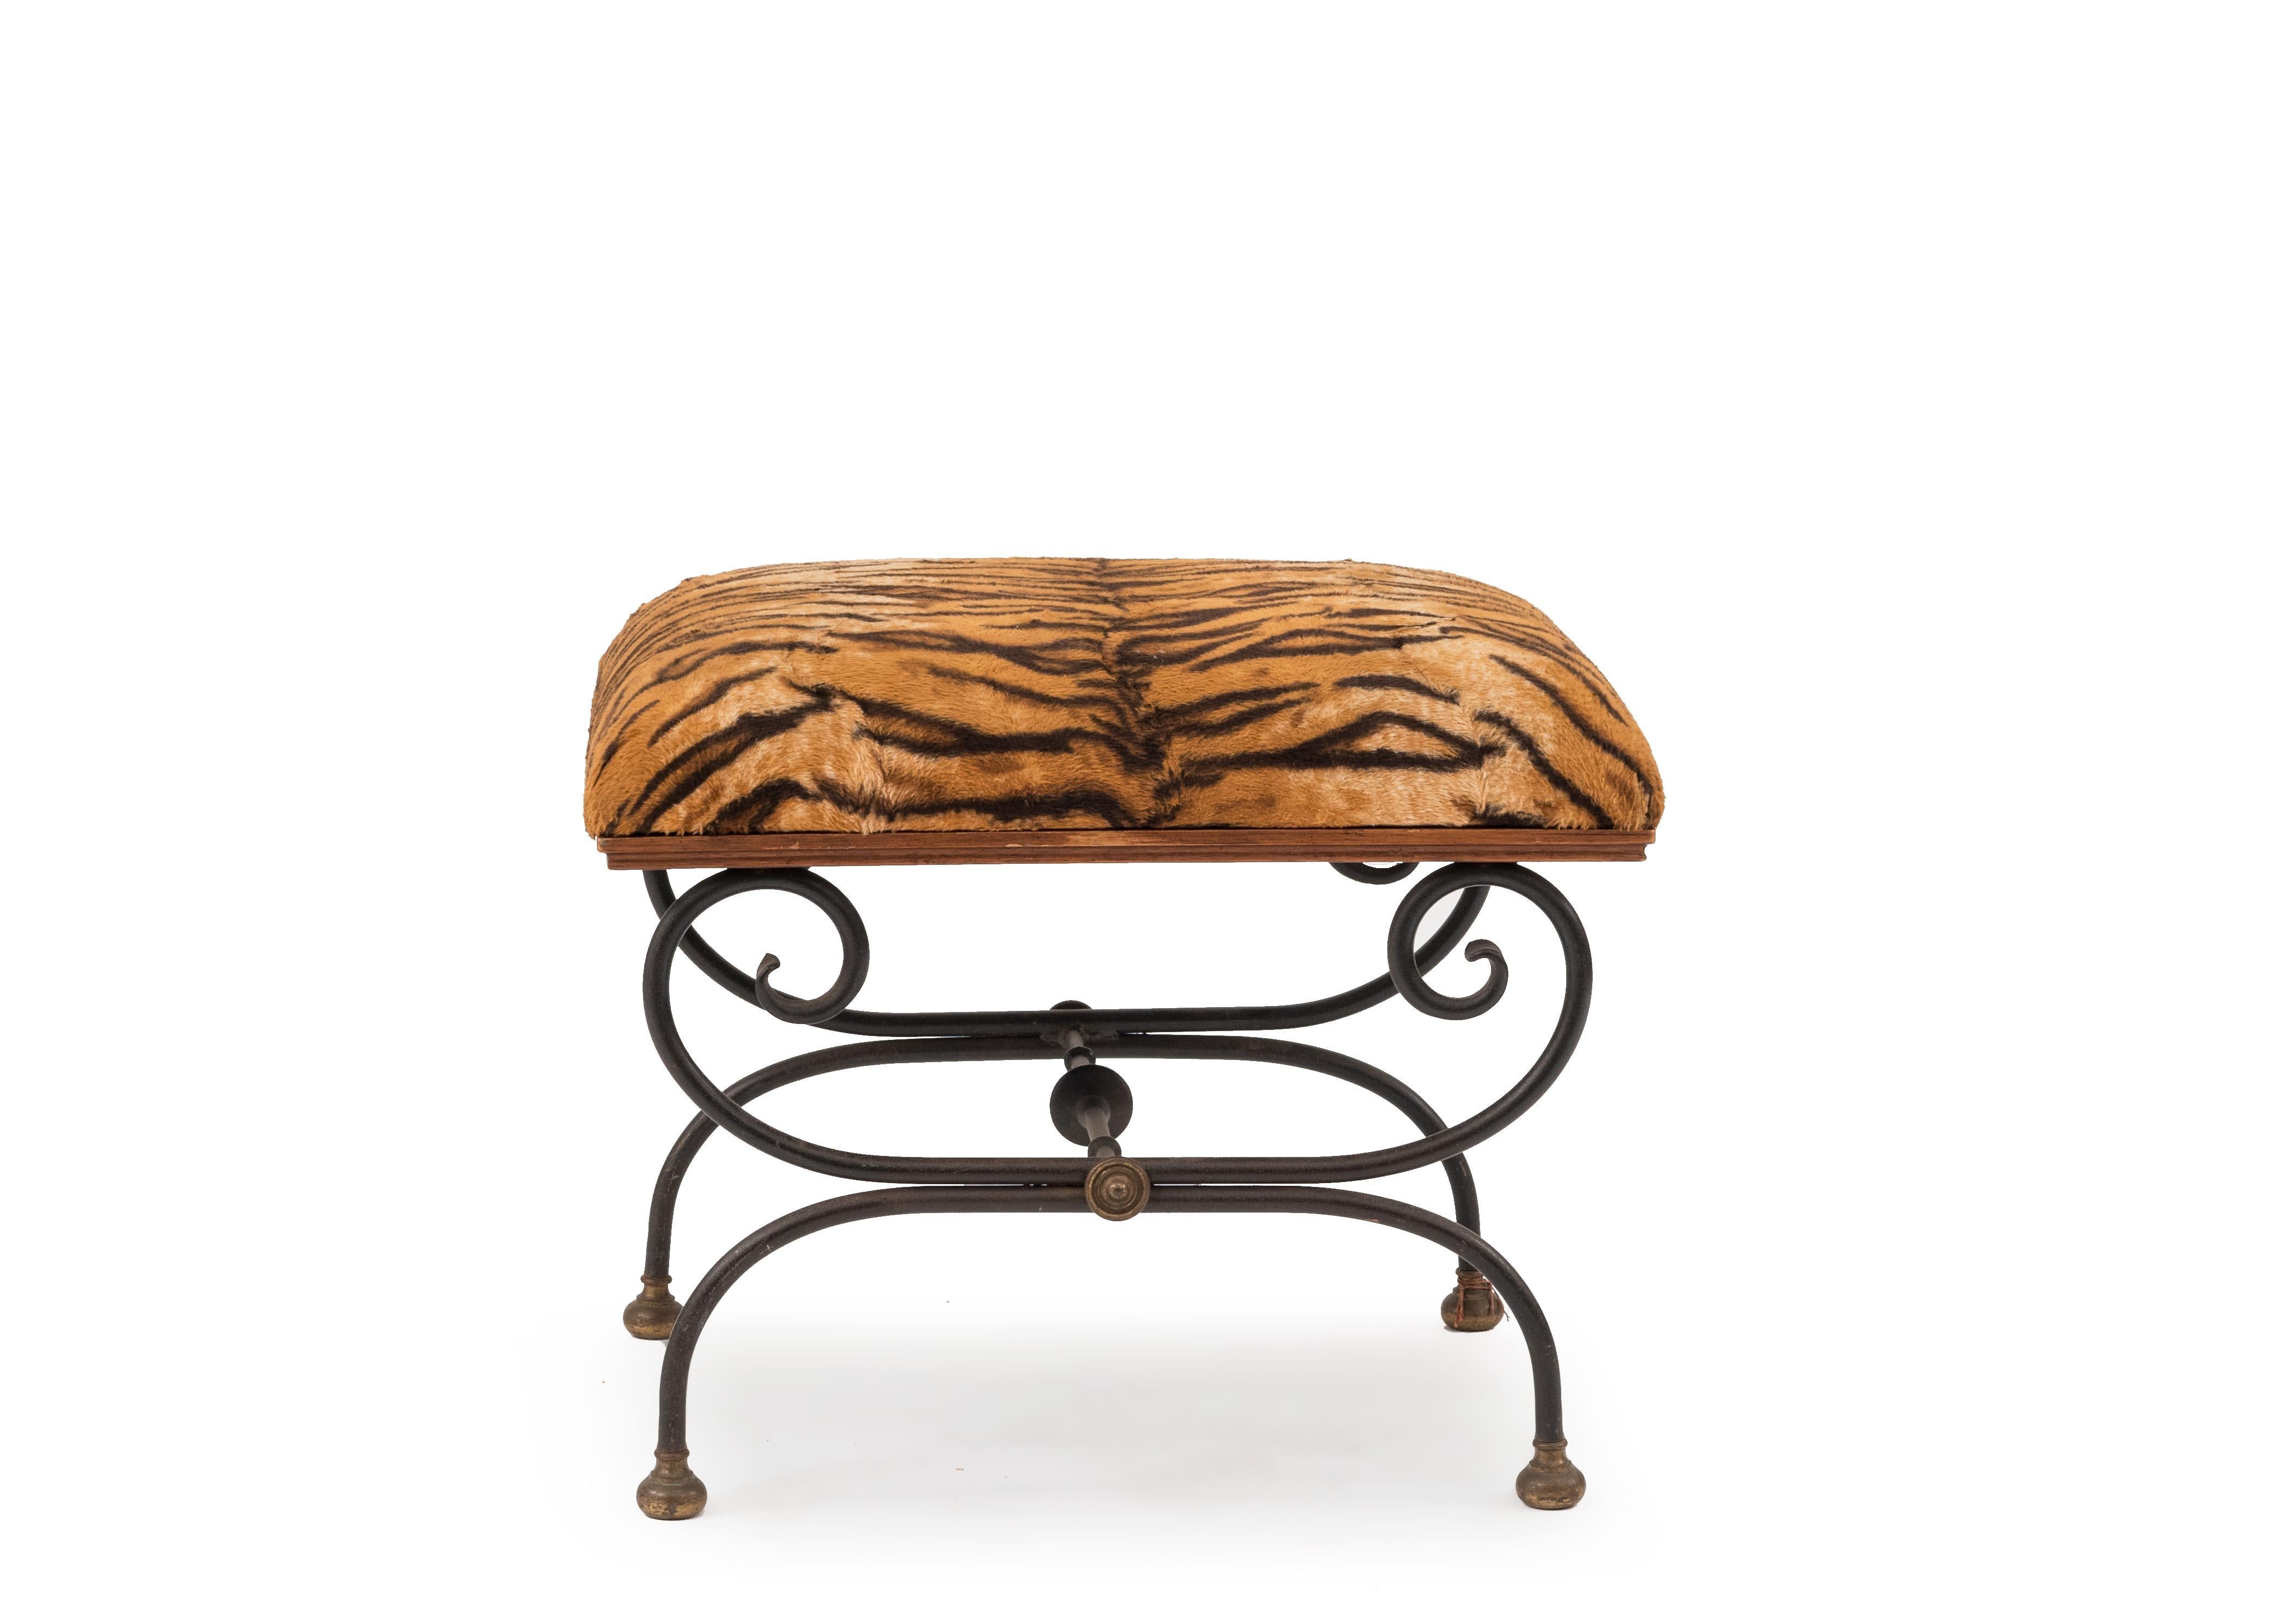 French Directoire style 19/20th Century) iron and brass cross leg bench with leopard upholstered seat.
